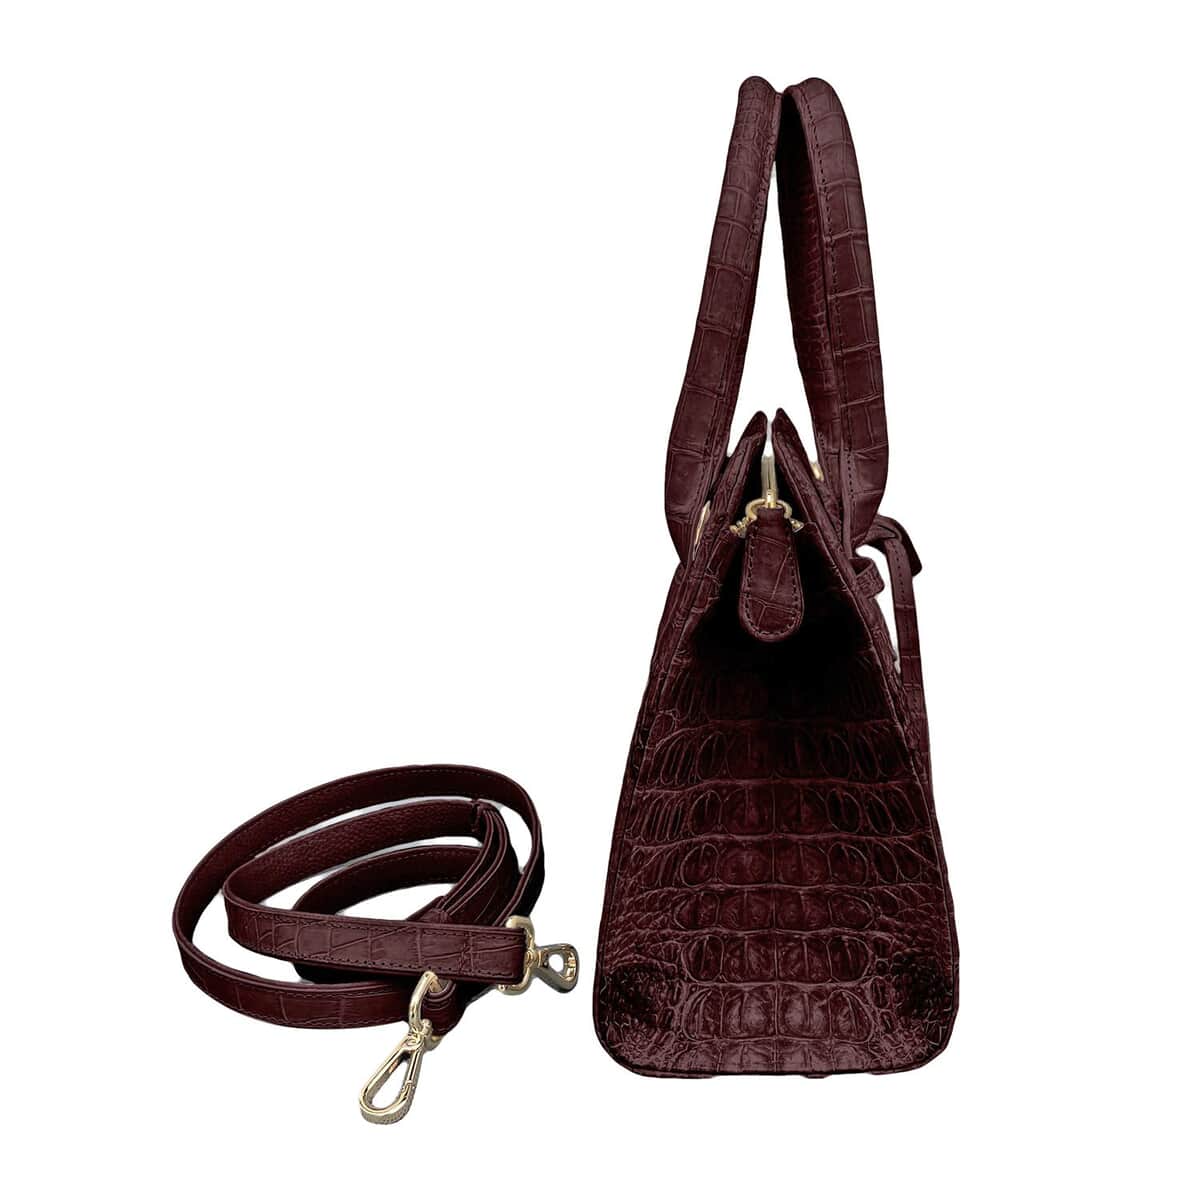 Grand Pelle Genuine Crocodile Leather Dark Chocolate Tote Bag (11"x4.3"x7.9") with Detachable Shoulder Strap image number 2